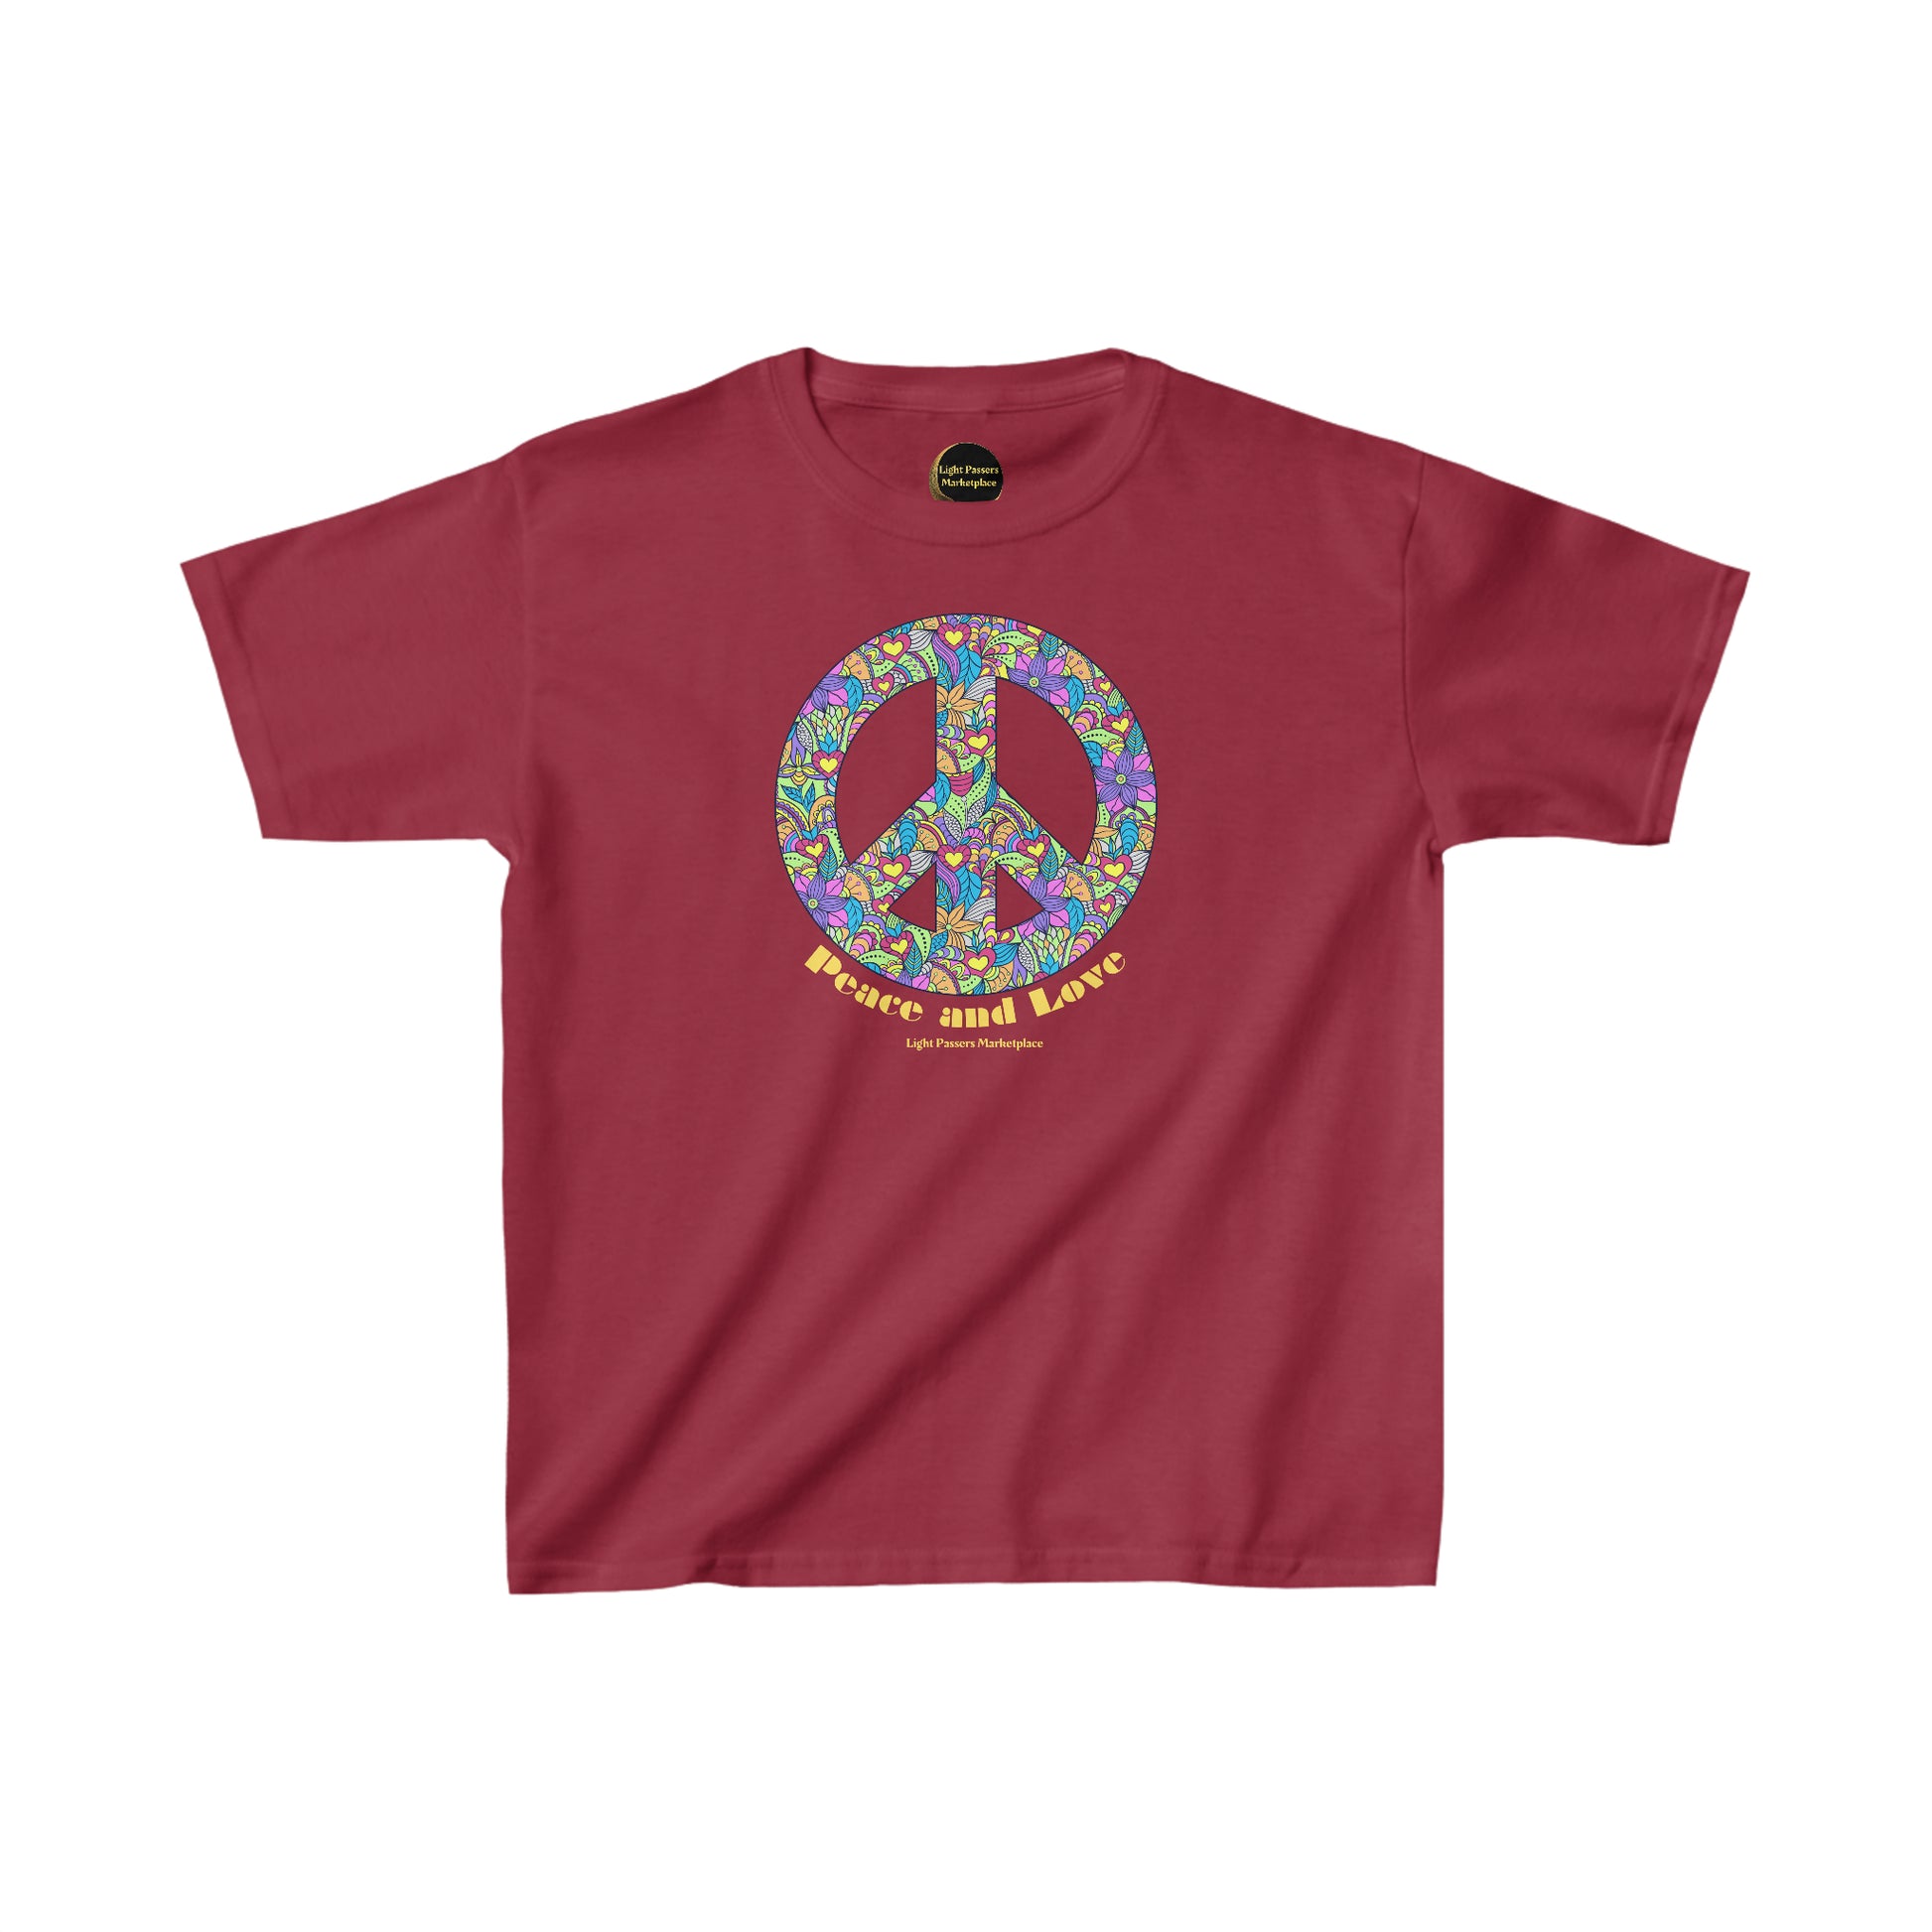 Youth heavy cotton t-shirt featuring a peace sign with flowers design. 100% cotton fabric, twill tape shoulders, ribbed collar, no side seams. Ethically made in the US.